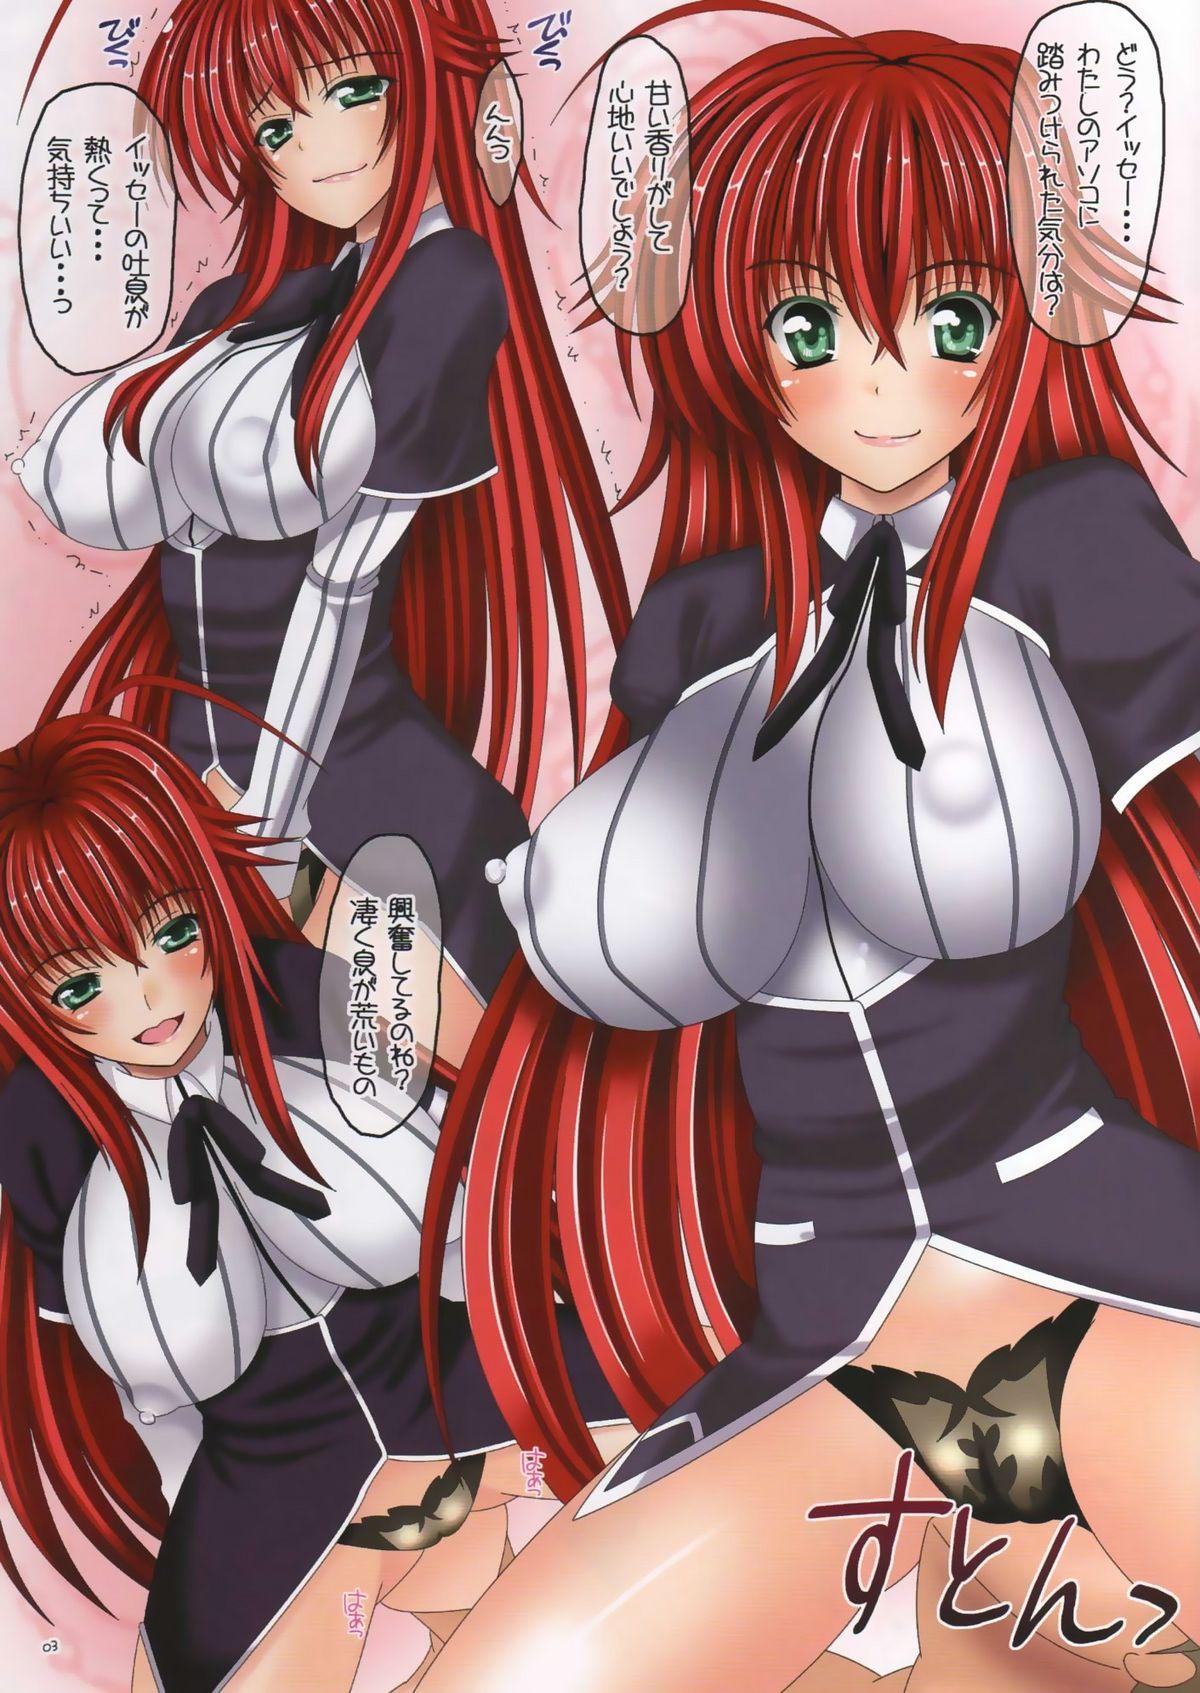 Hard Porn Colorful DxD - Highschool dxd Nut - Page 2